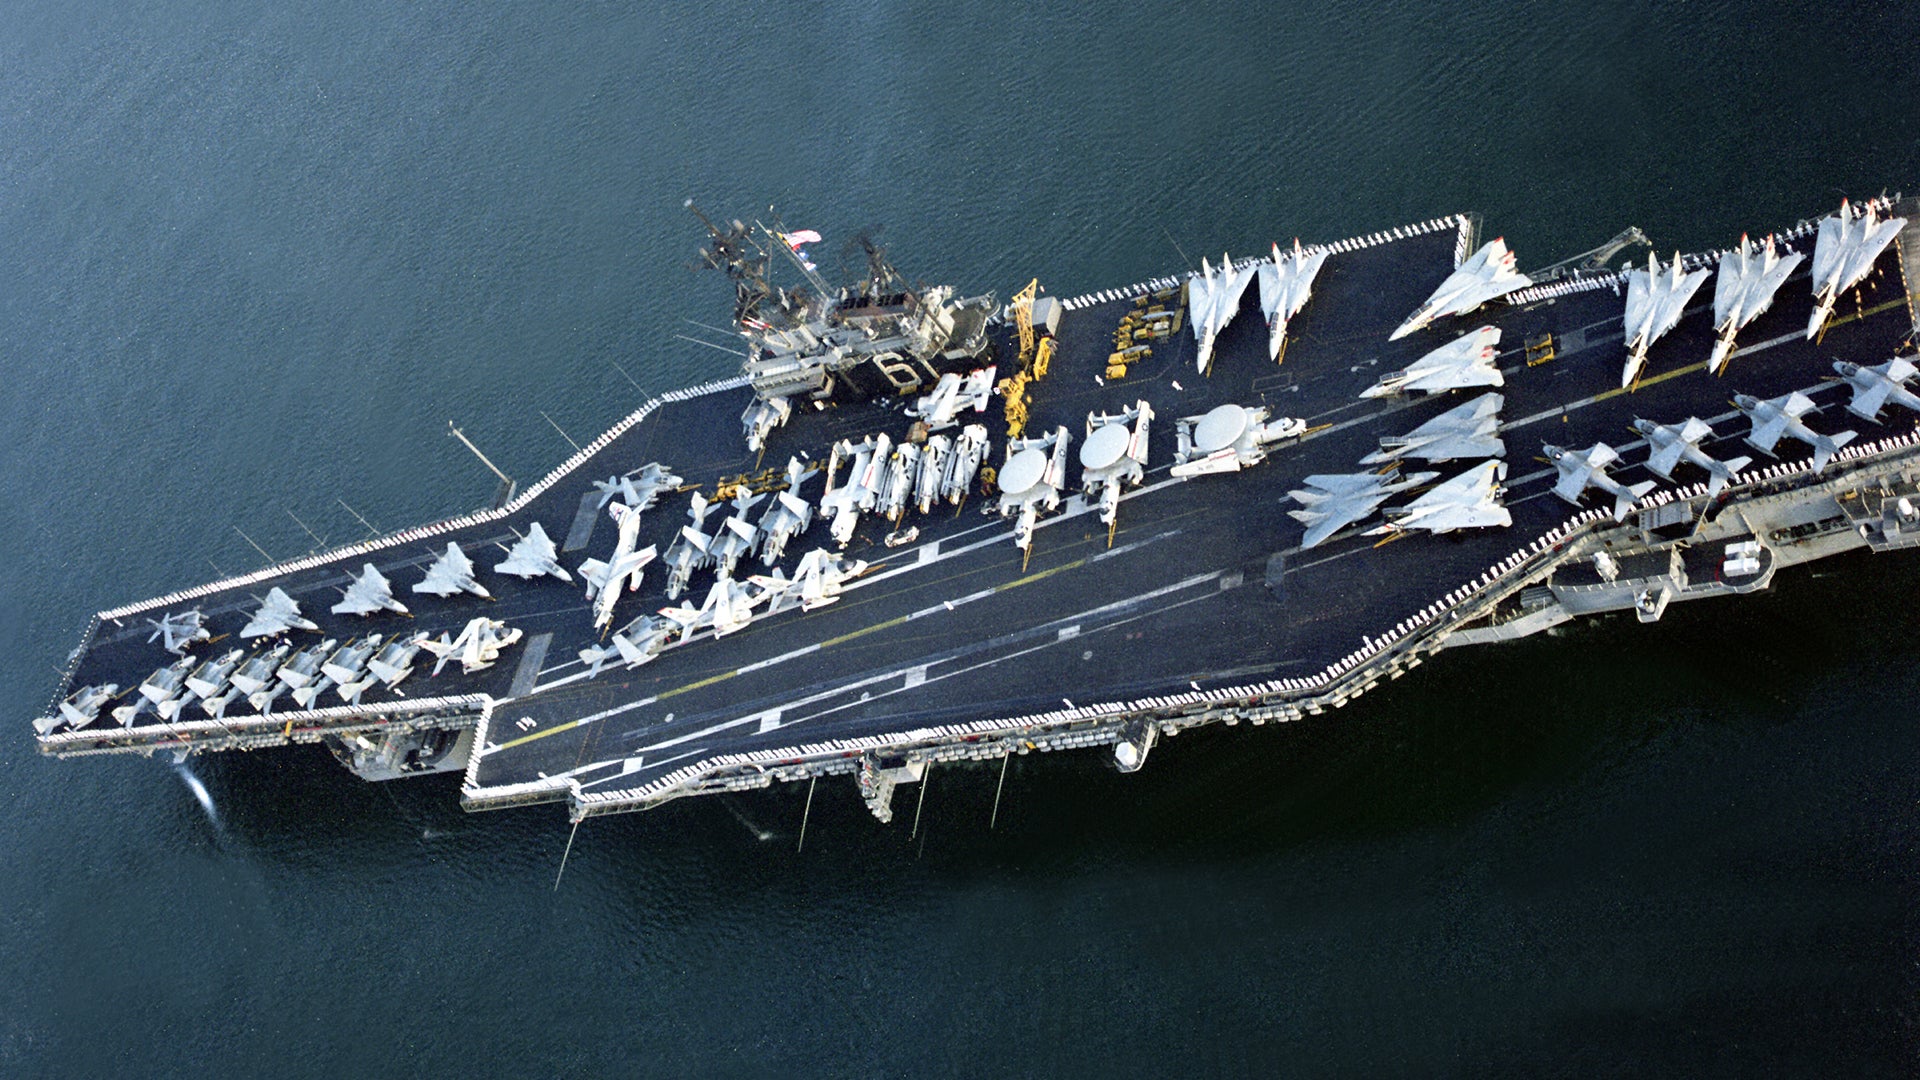 The USS Ranger Sailed With A Unique “Grumman Air Wing” In The Mid 1980s